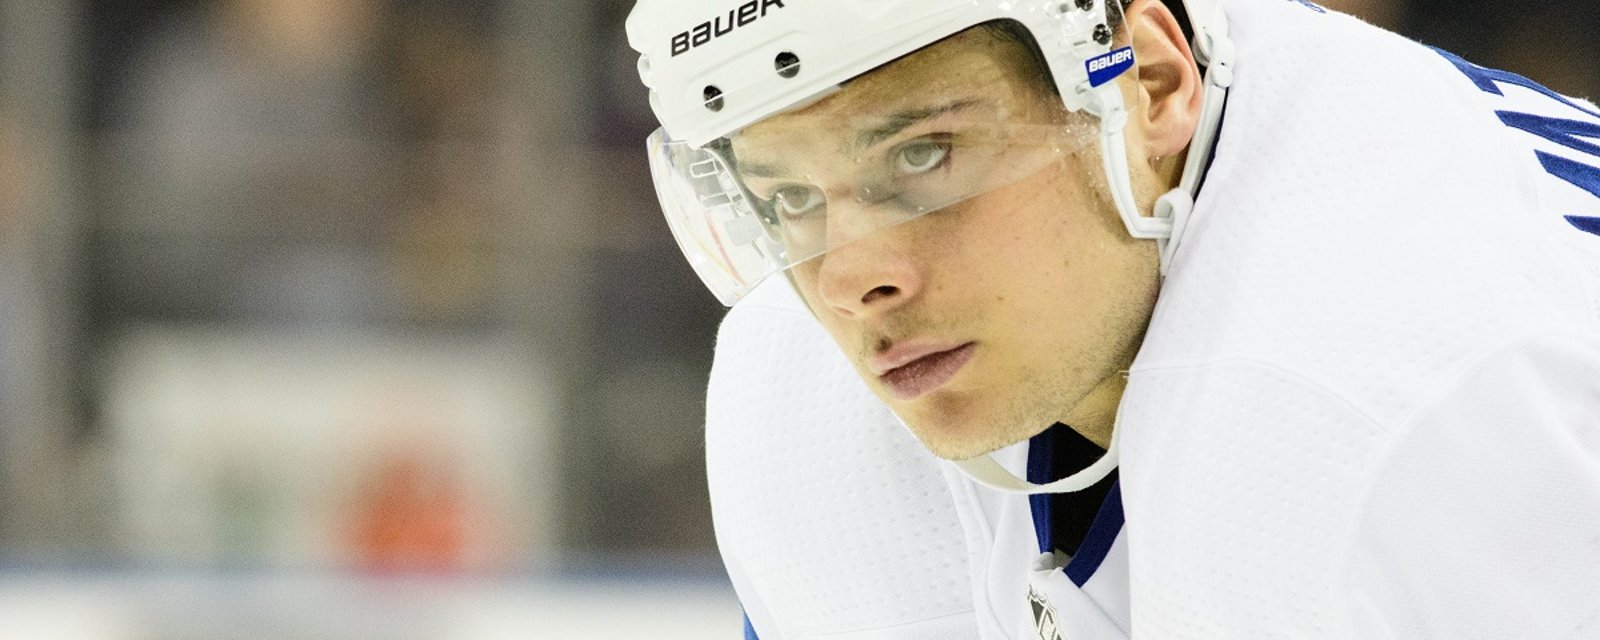 Breaking: Auston Matthews leaves the game in serious pain.